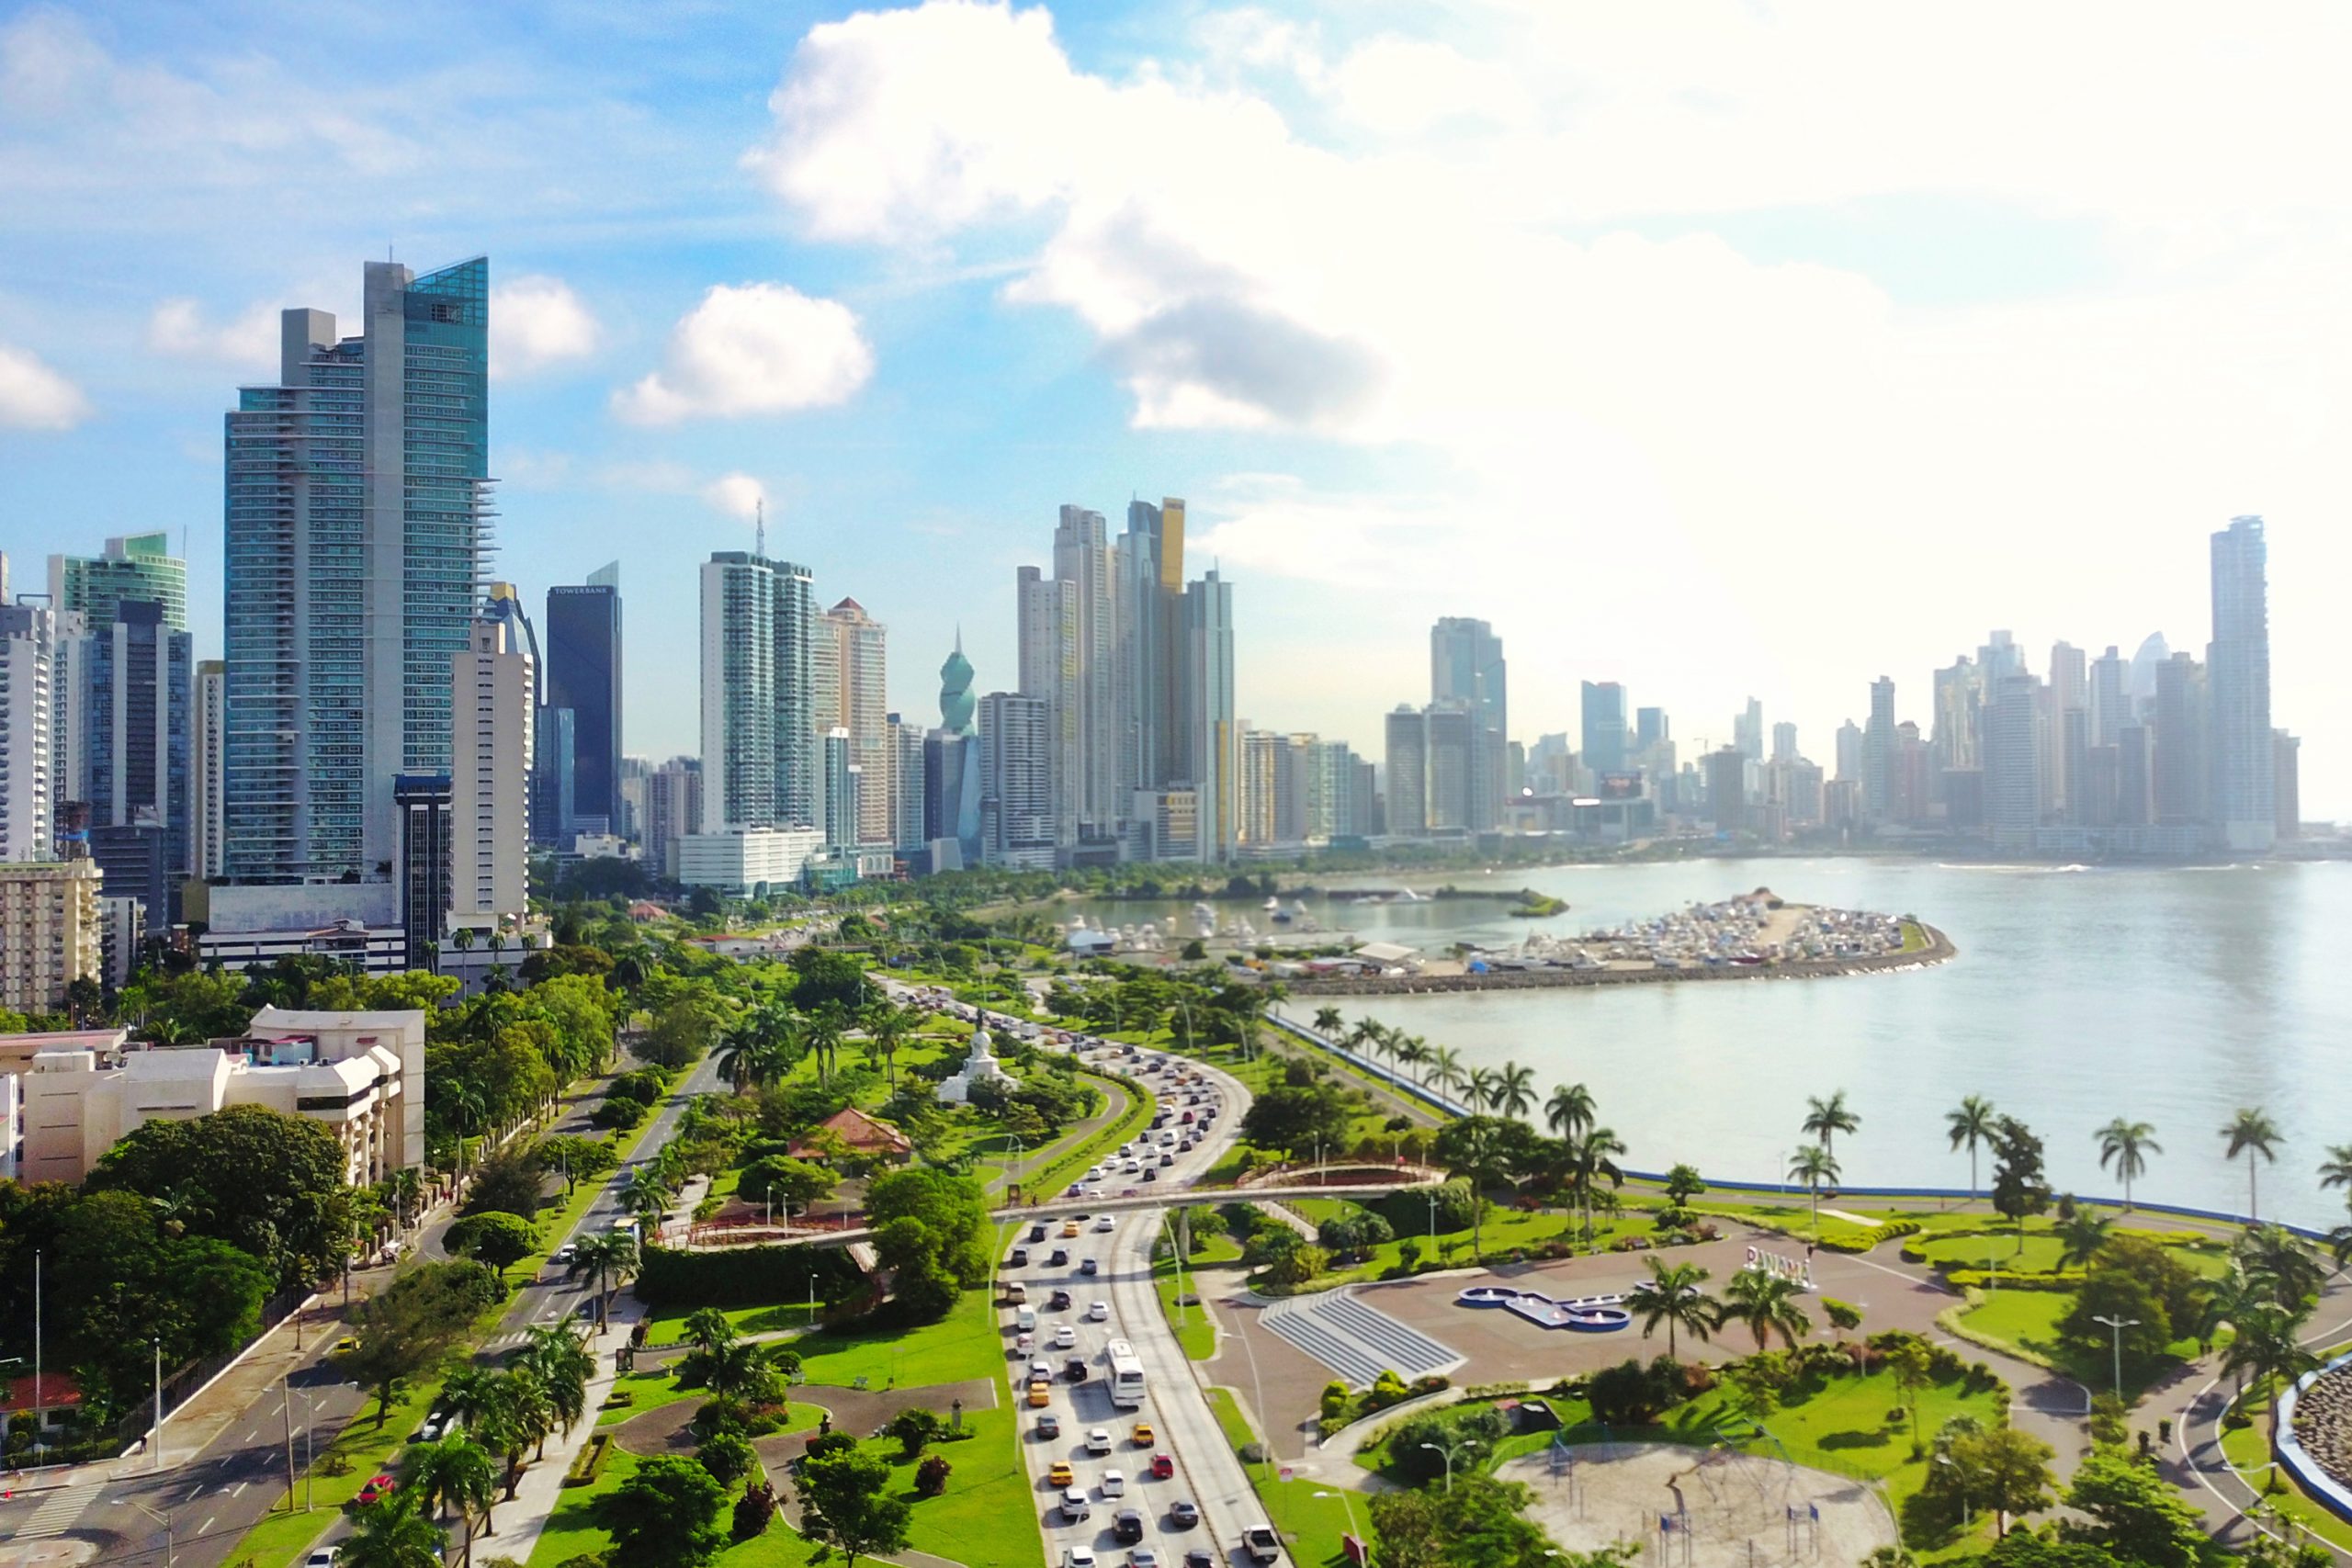 We’re making moves around the world! The Agency is proud to announce our first office in Central America, located in Panama City, a vibrant international destination.